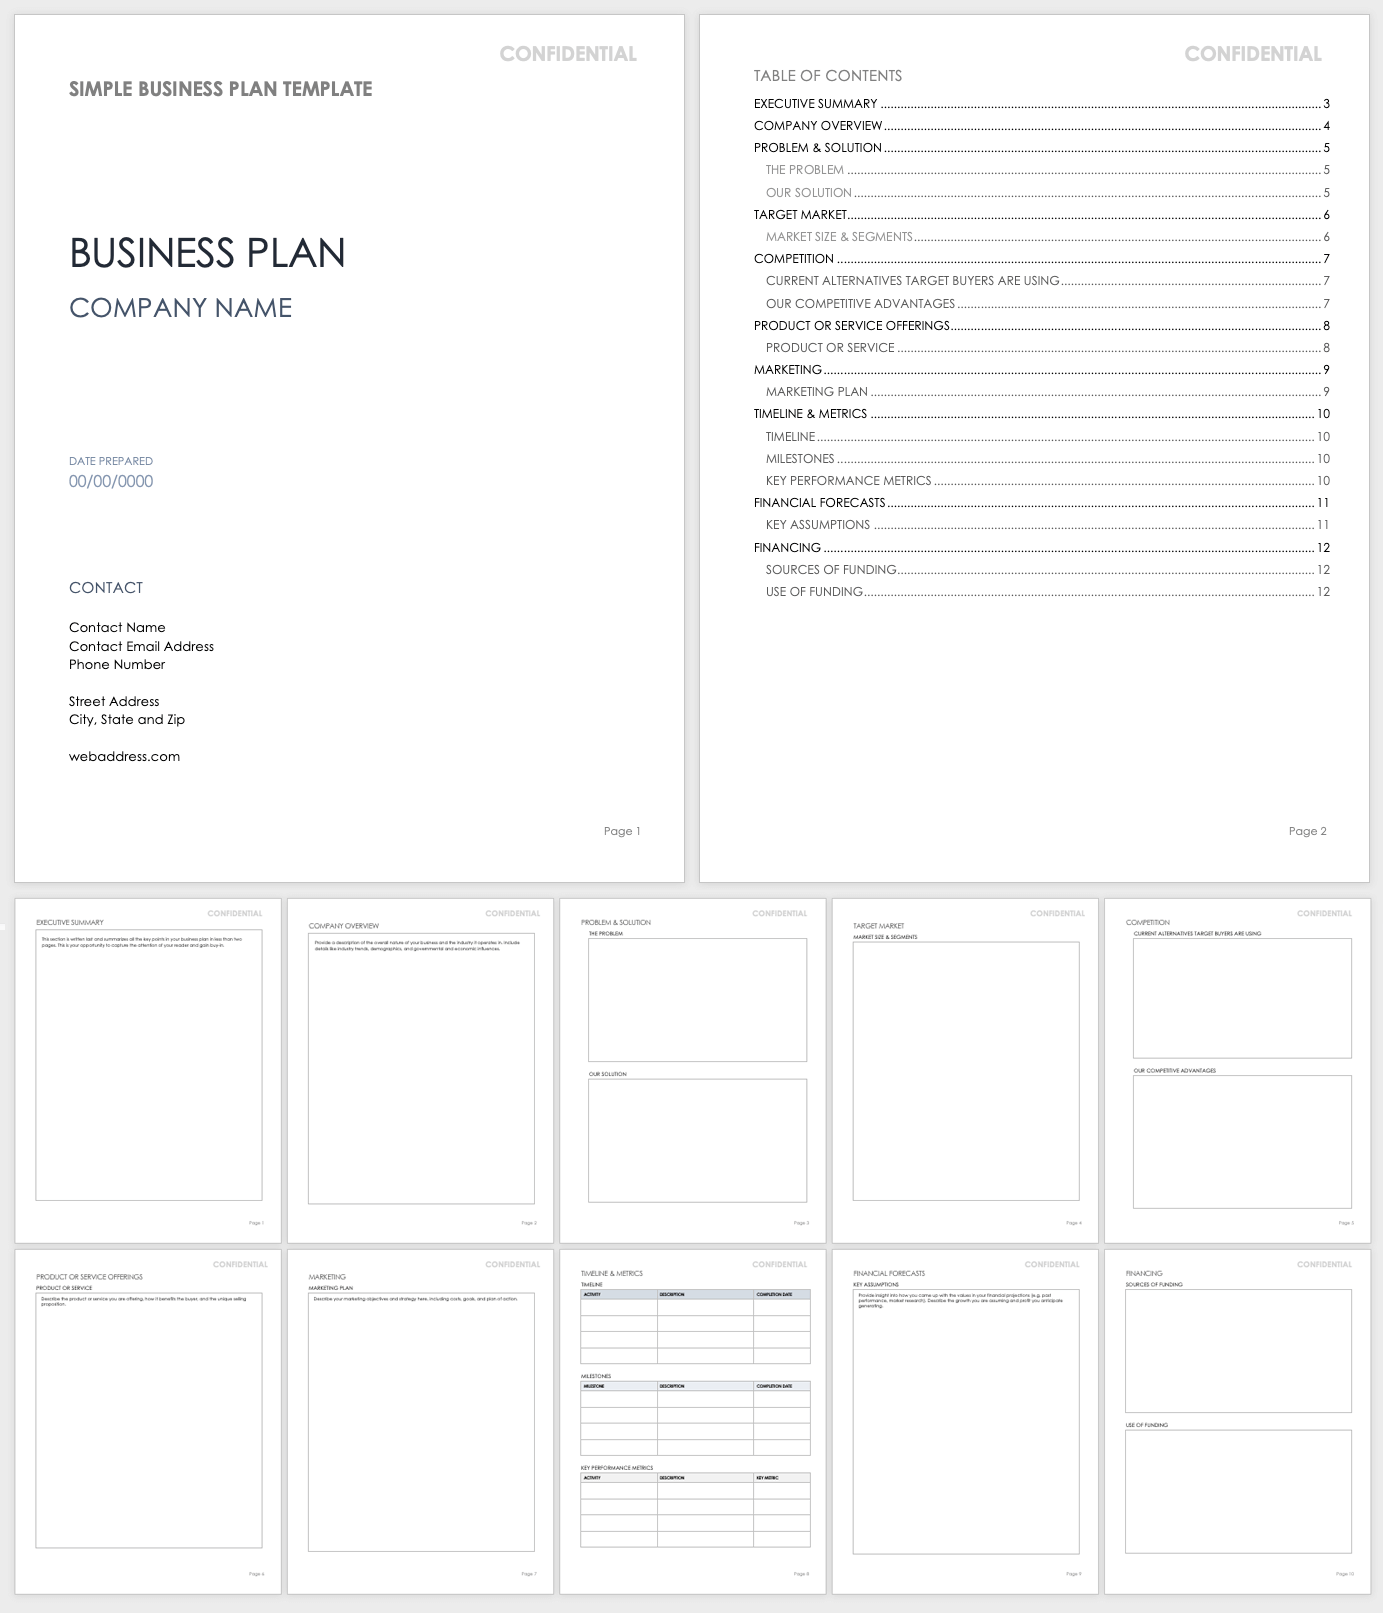 Free Simple Business Plan Templates  Smartsheet Throughout Business Plan For A Startup Business Template